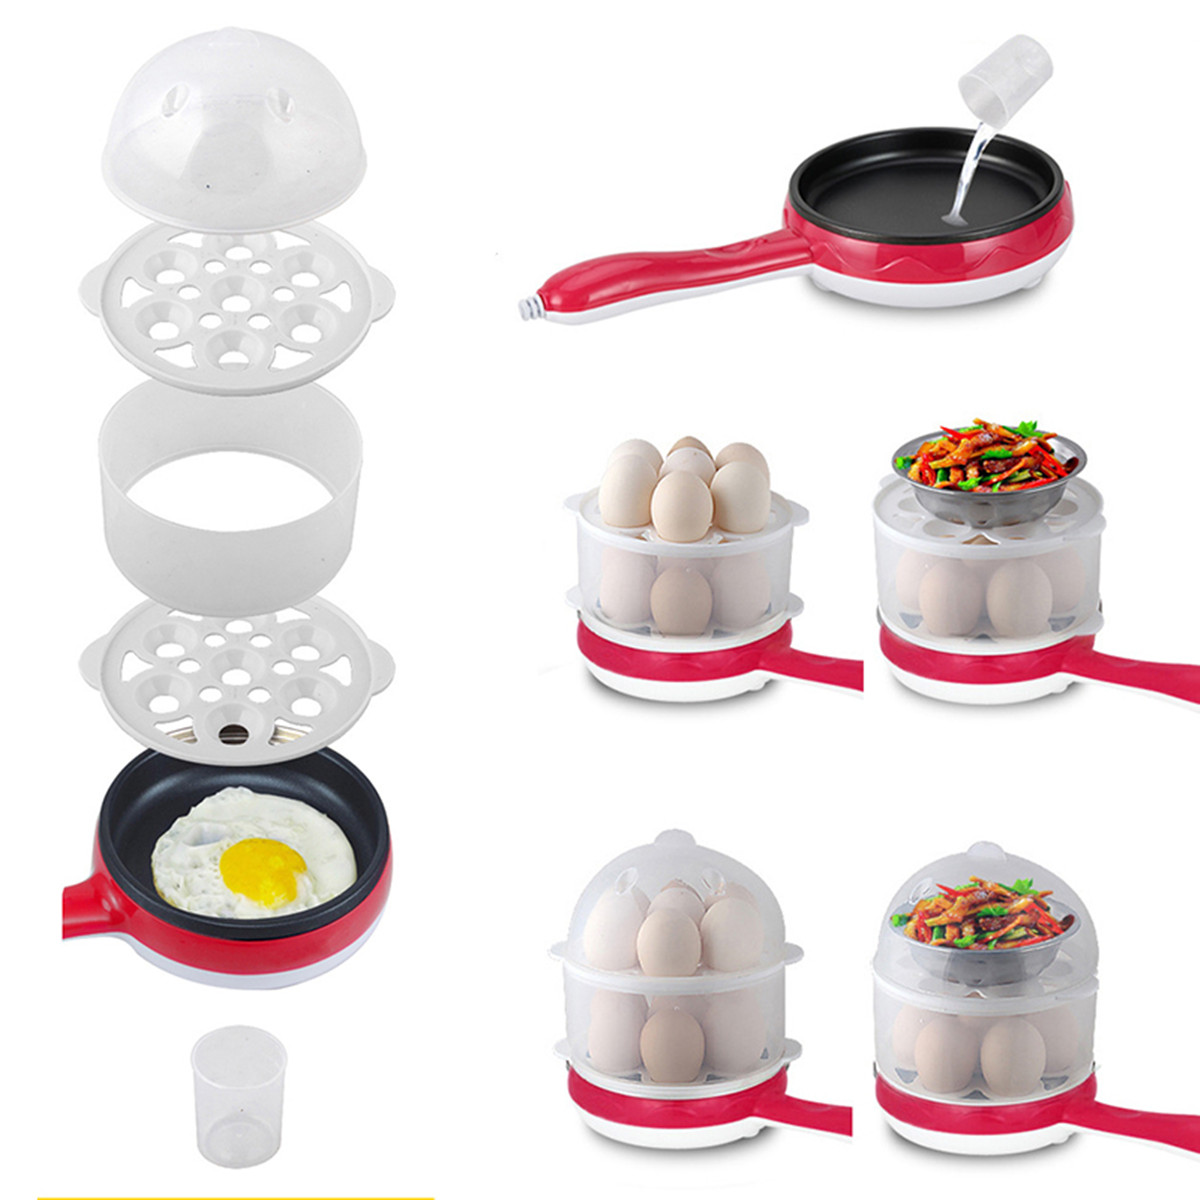 

Electric 14 Egg Boiler Food Steamer Cooking Machine With Frying Pan Non-stick